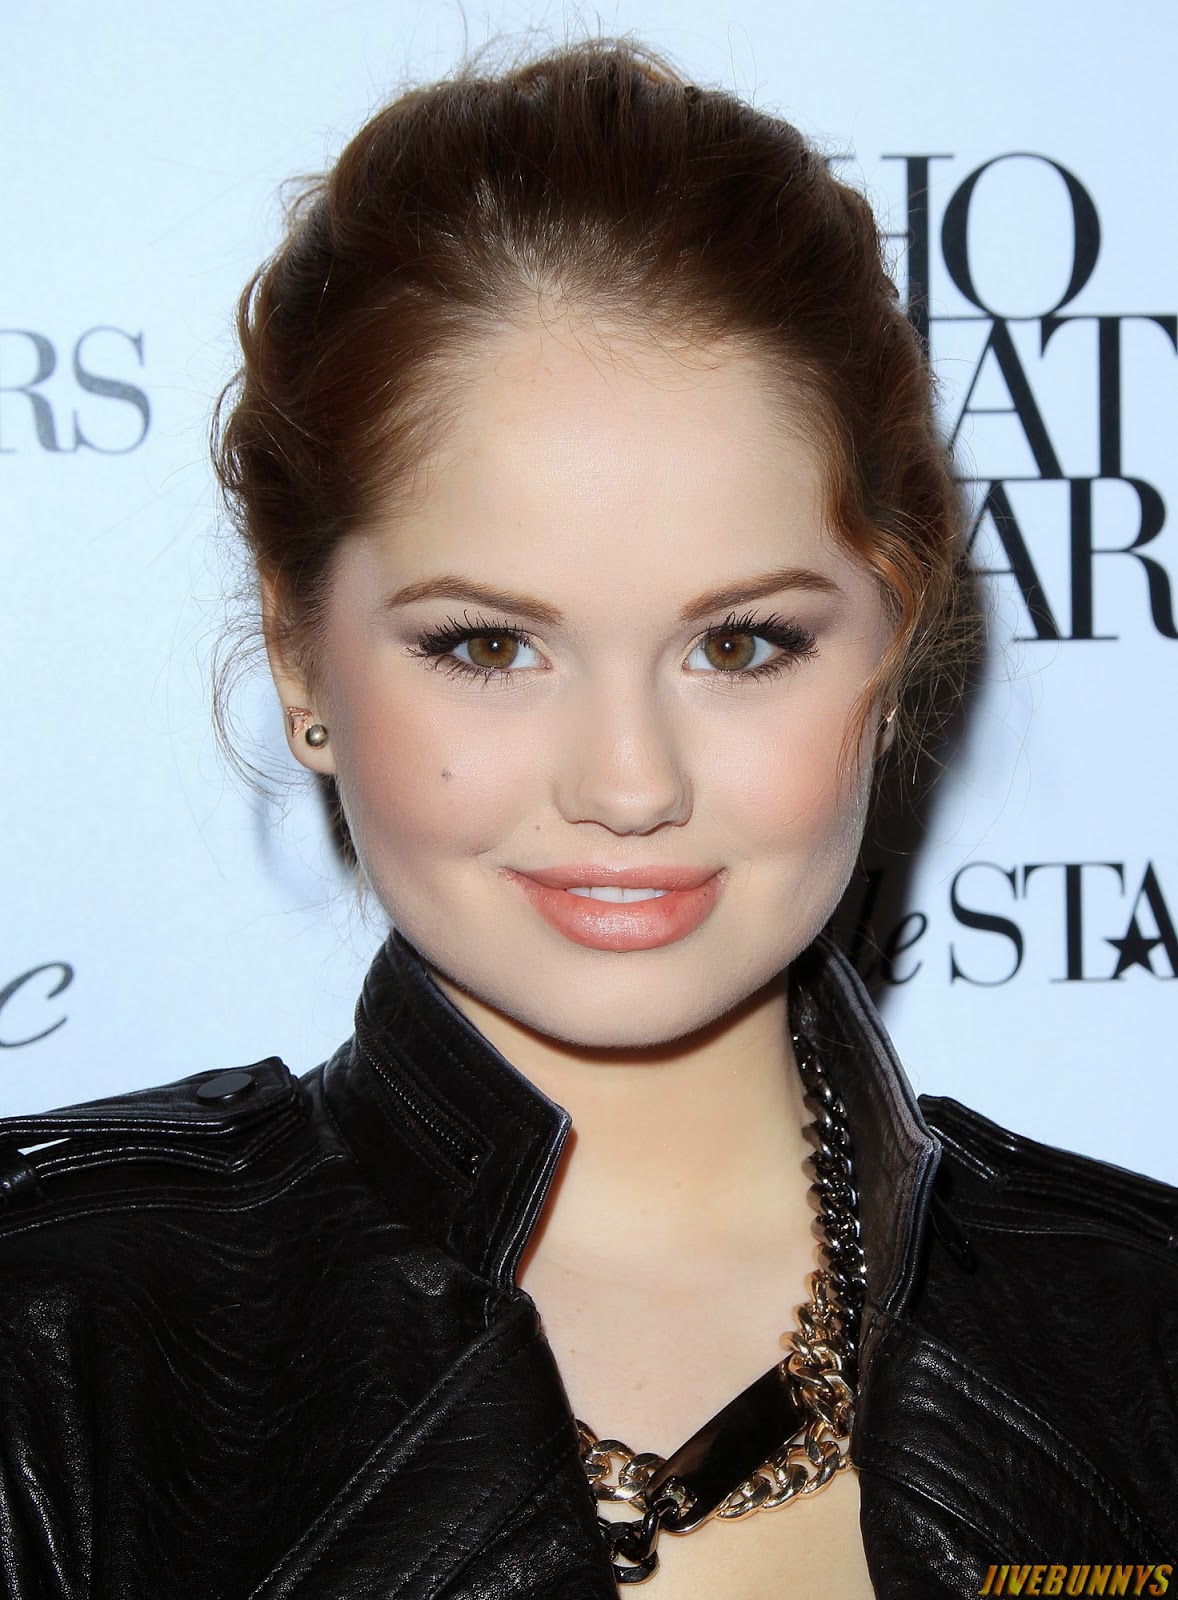 Debby Ryan Hot Photos and Image Gallery 4